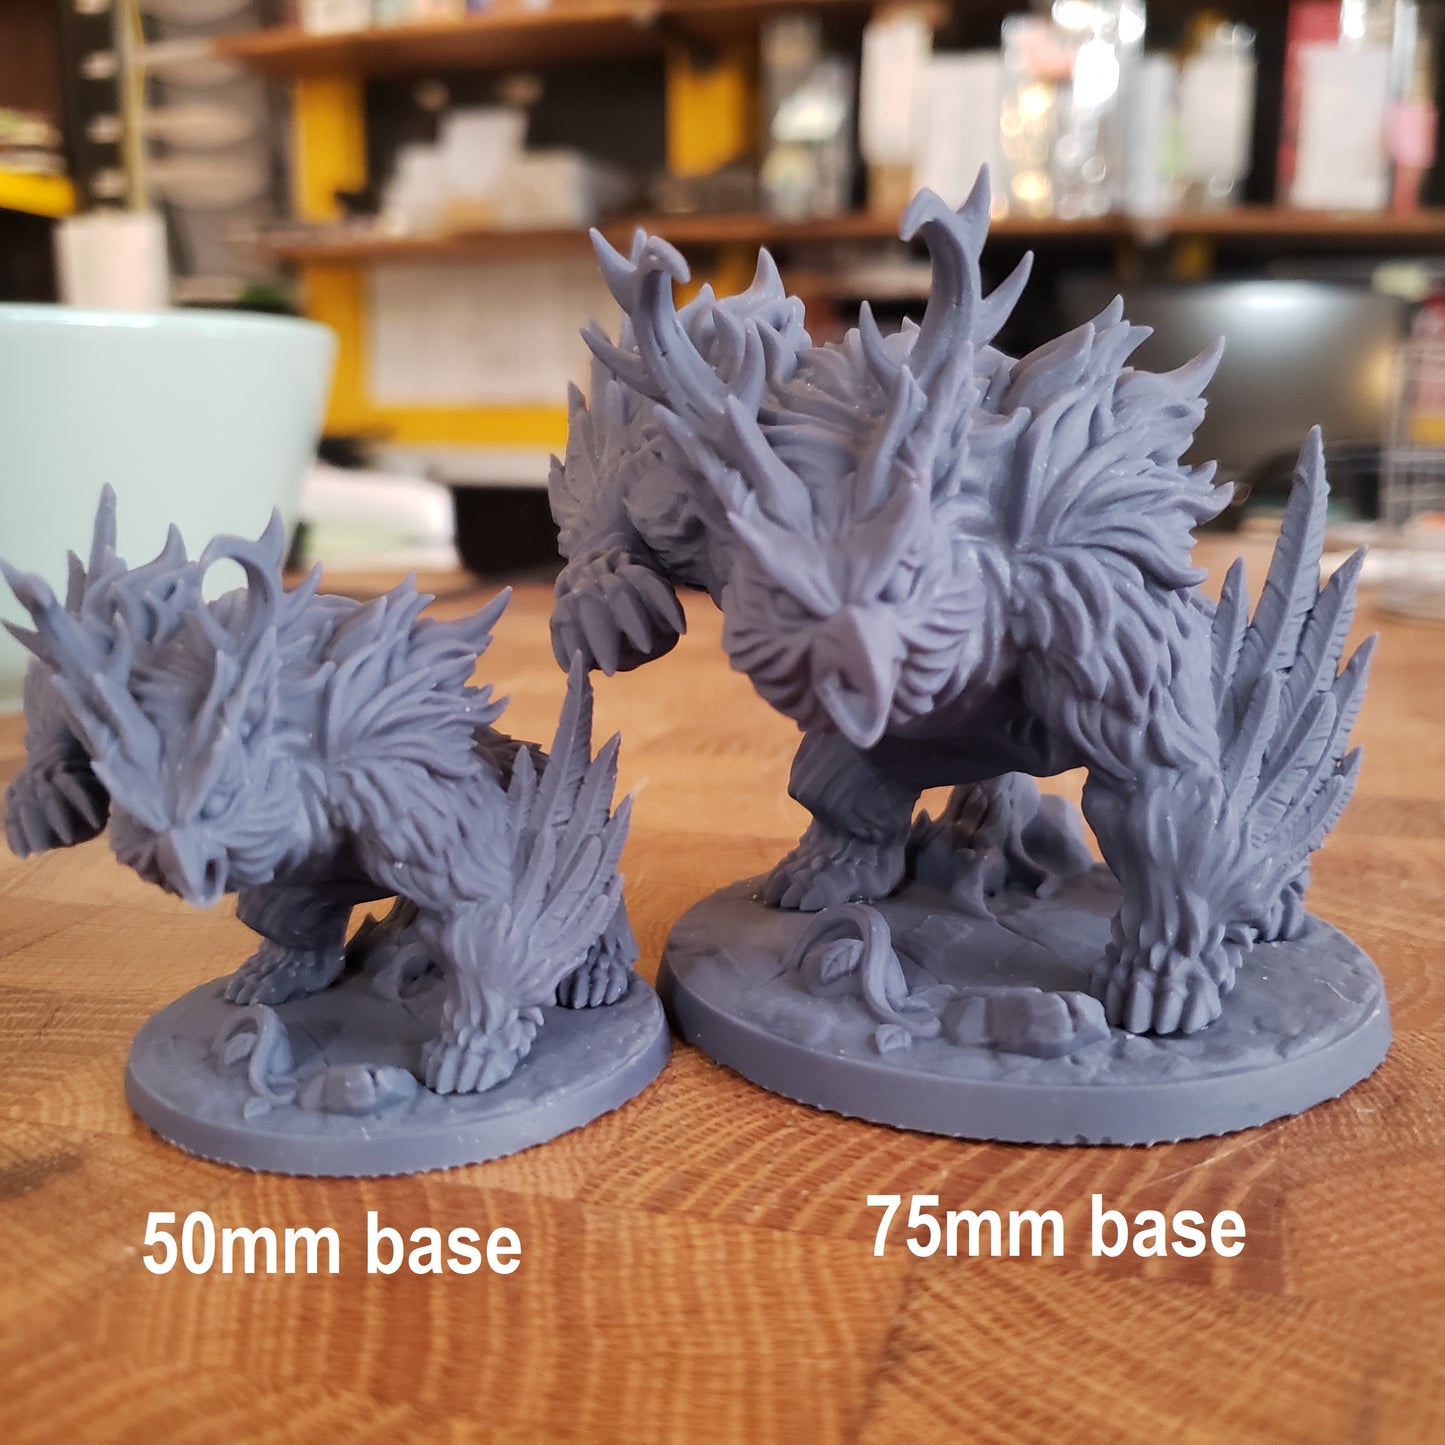 Image shows two different sized examples of a 3D printed owlbear gaming miniature printed in-house at All Systems Go